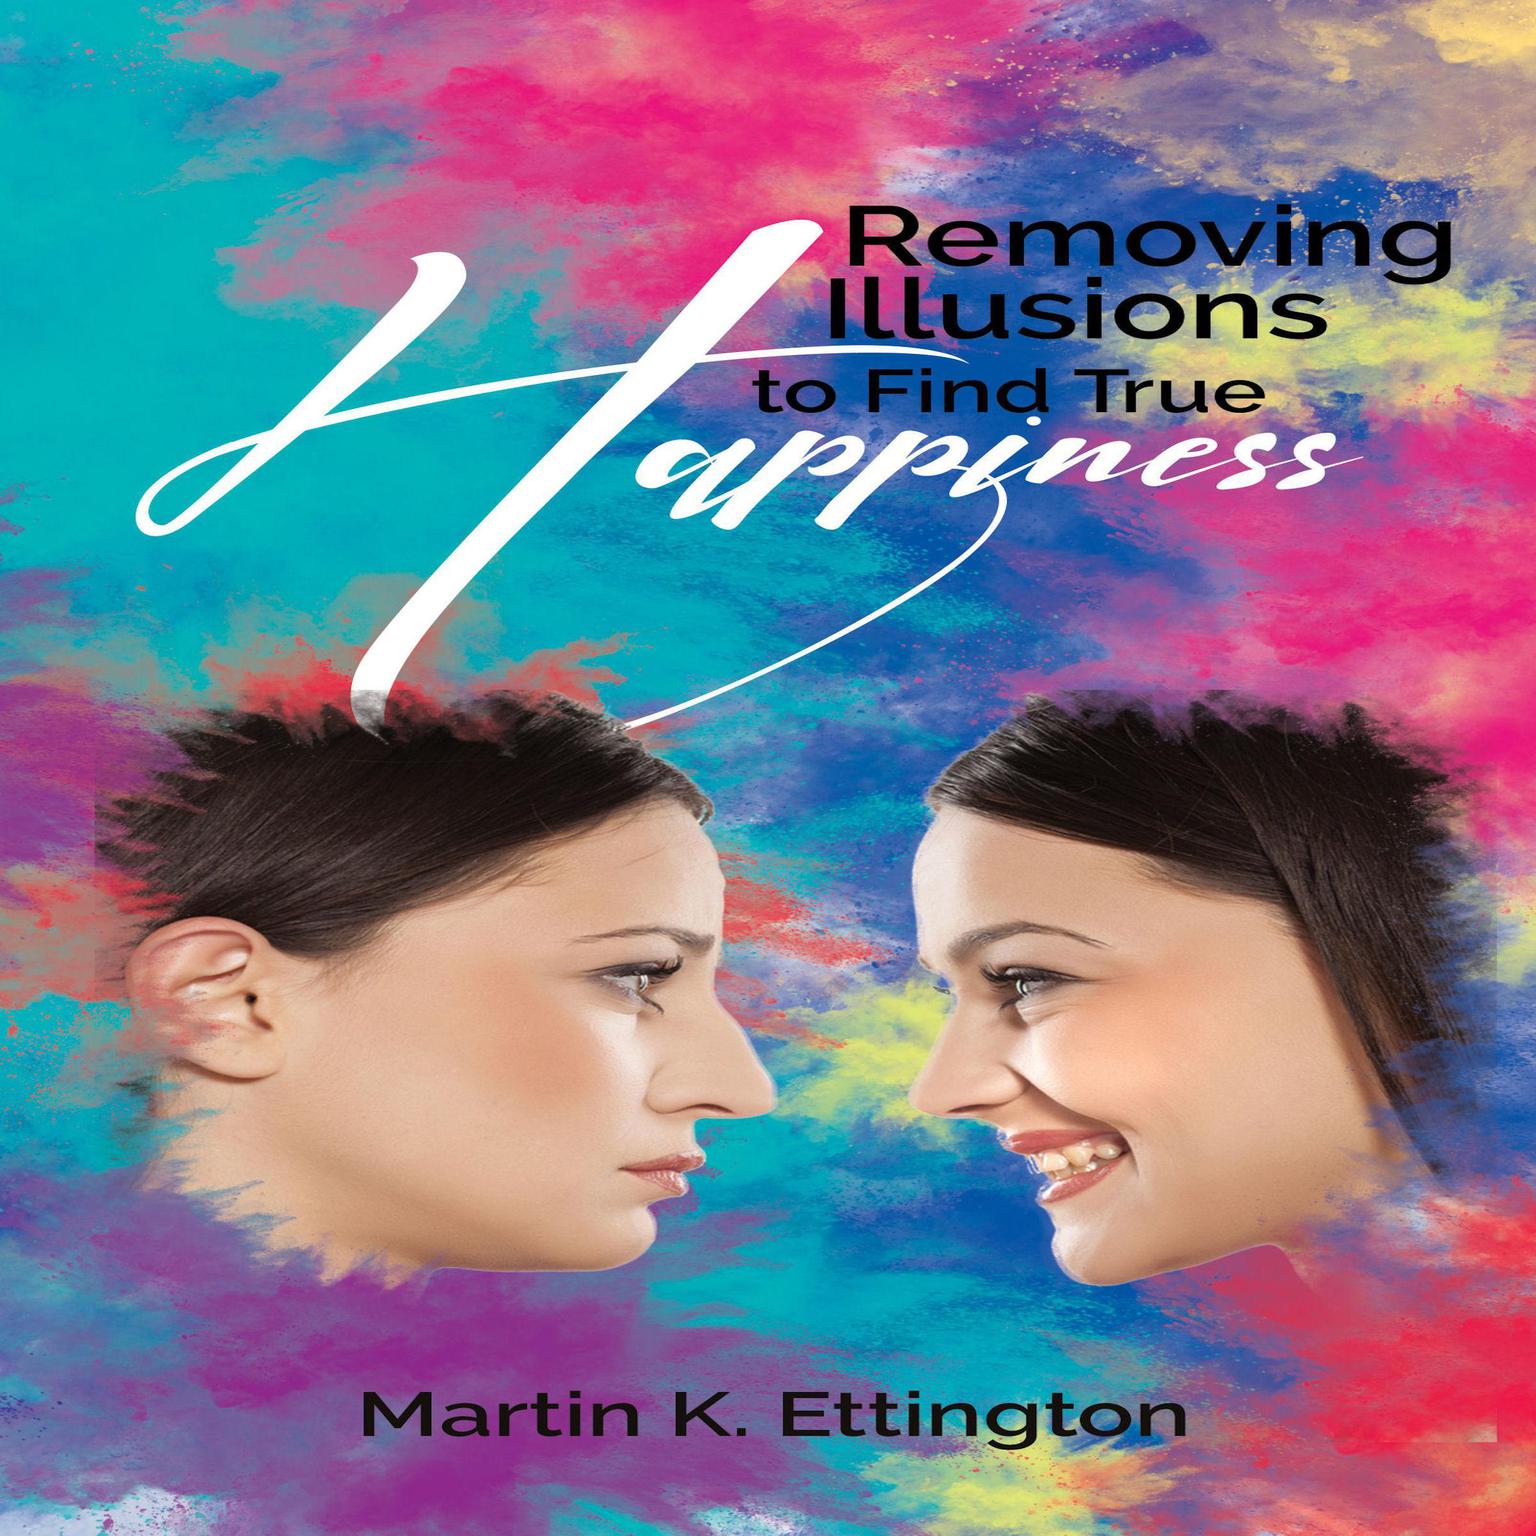 Removing Illusions to find True Happiness Audiobook, by Martin K. Ettington